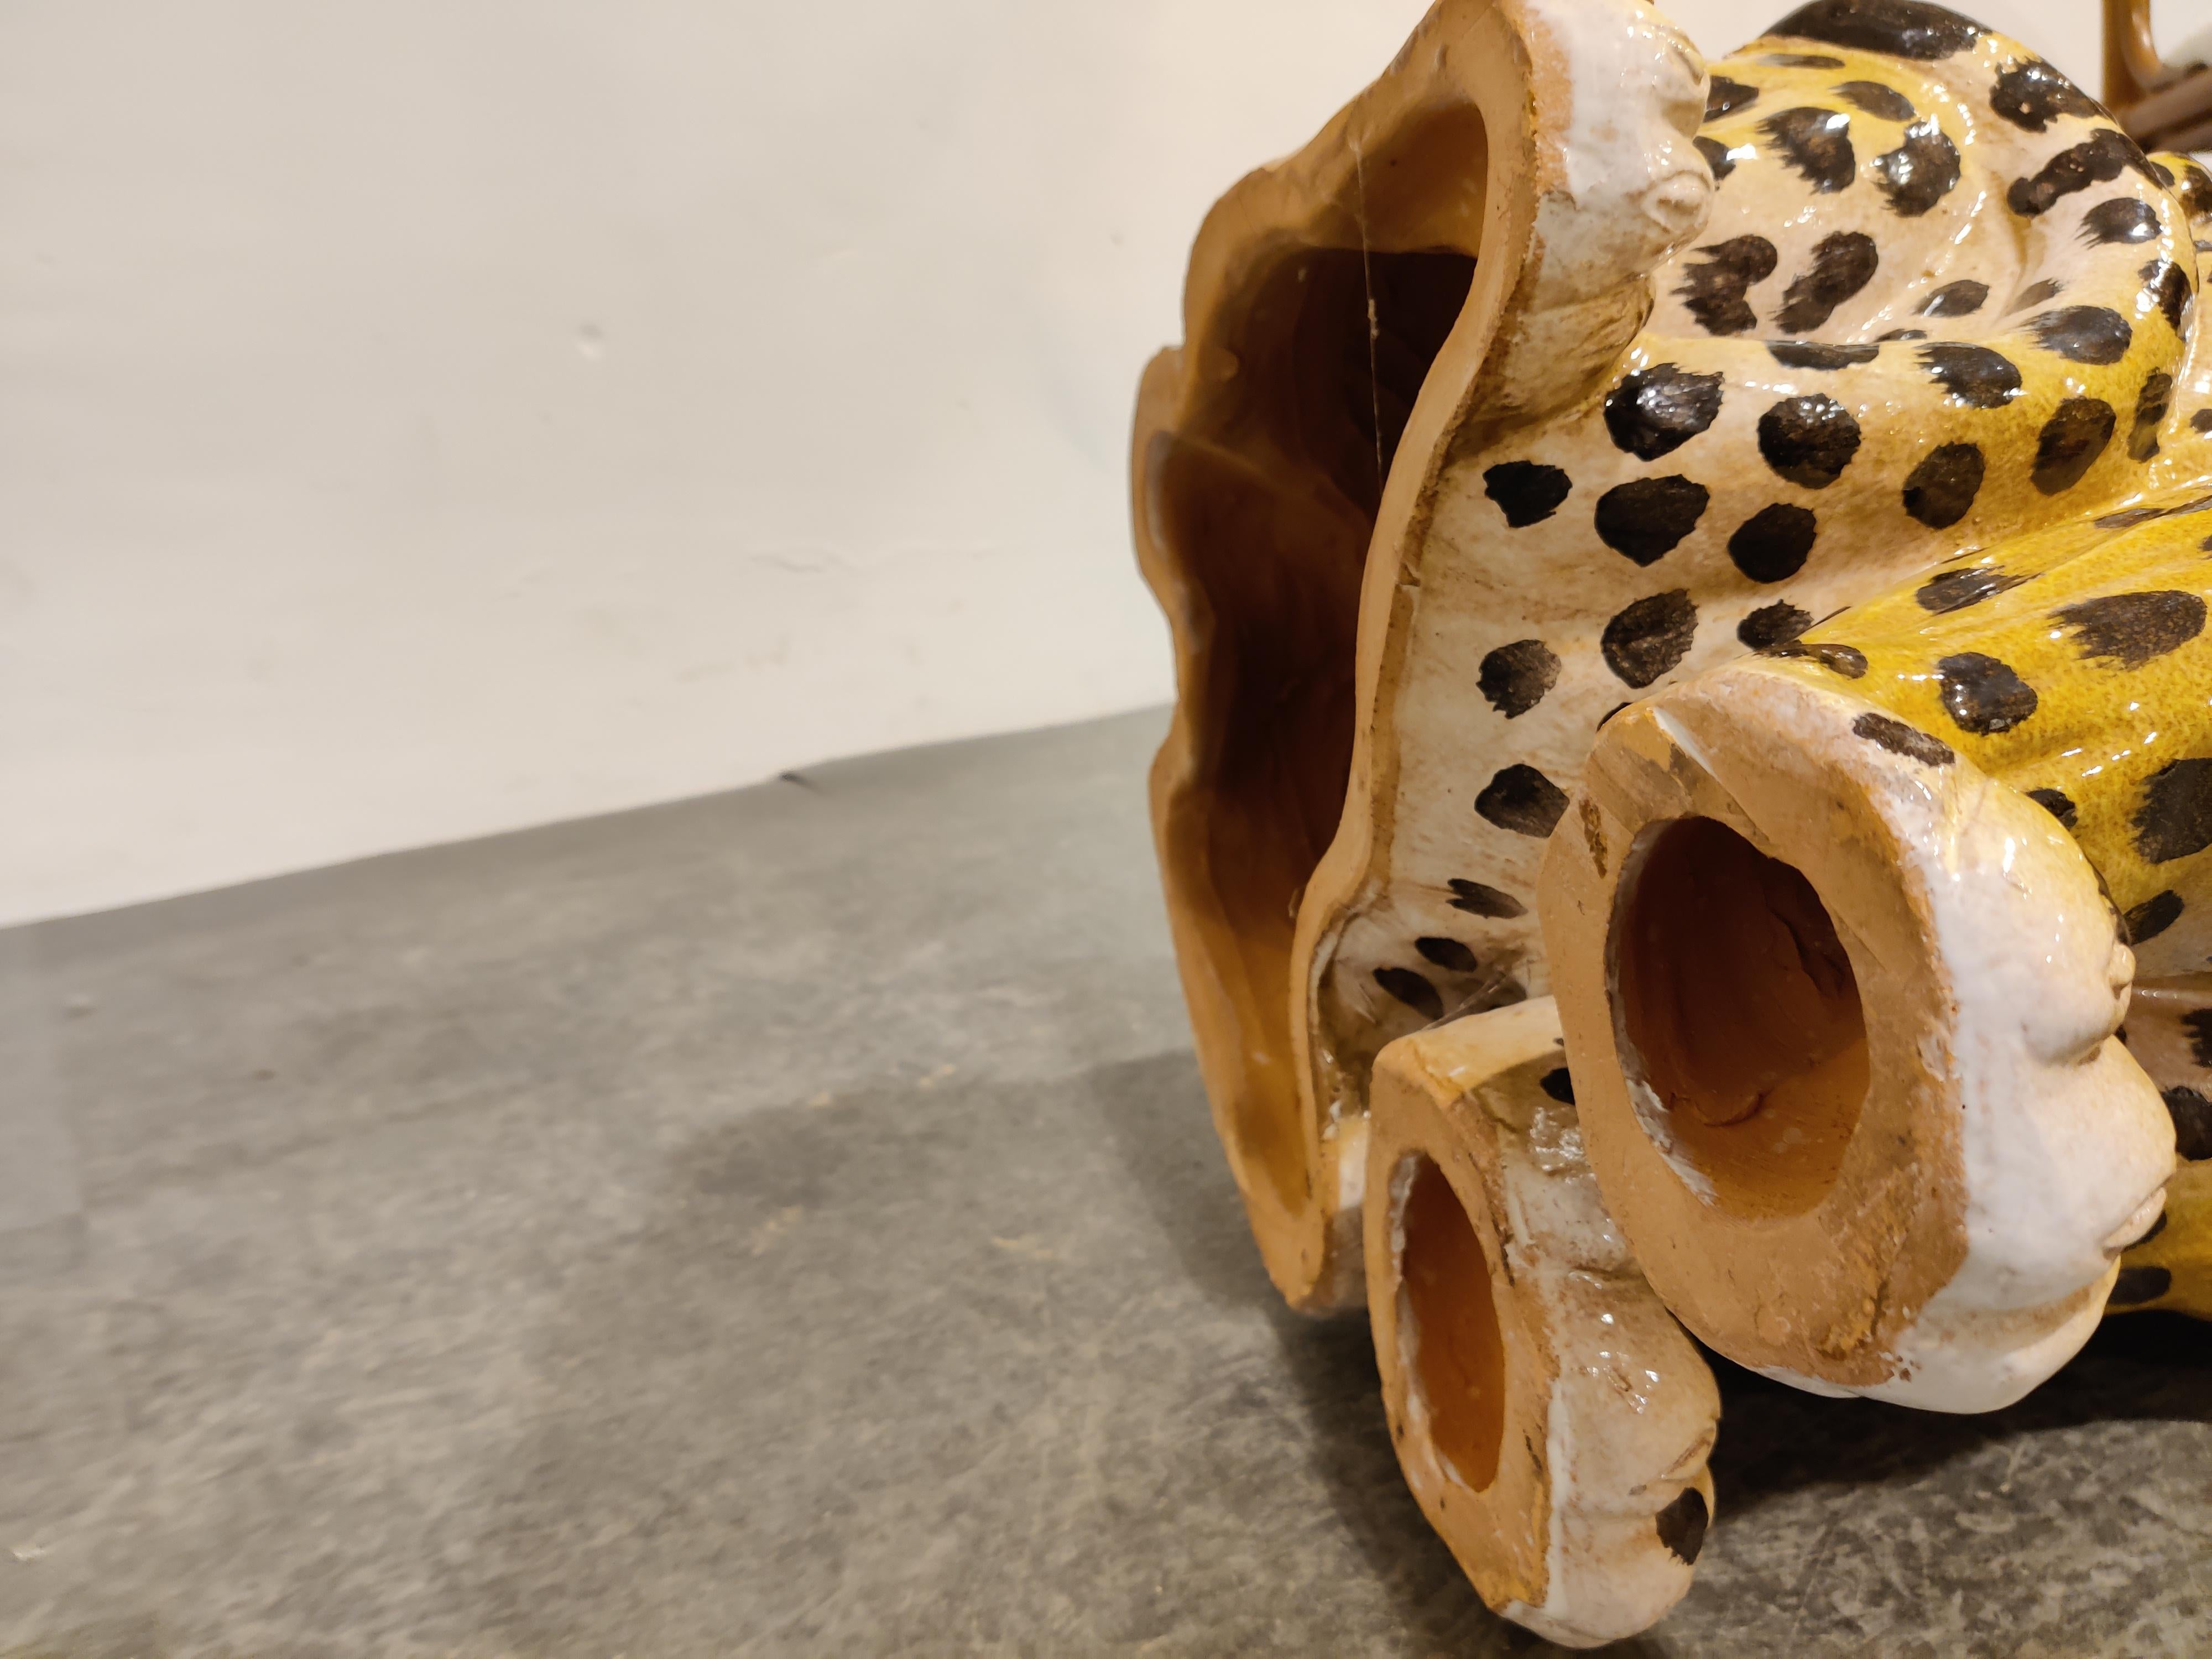 Hand painted glazed terracotta leopard sculpture with open mouth.

Heavy sculpture, all hand painted.

Good condition, no damage

1960's - Italy

Dimensions: 
Height: 82cm/32.28